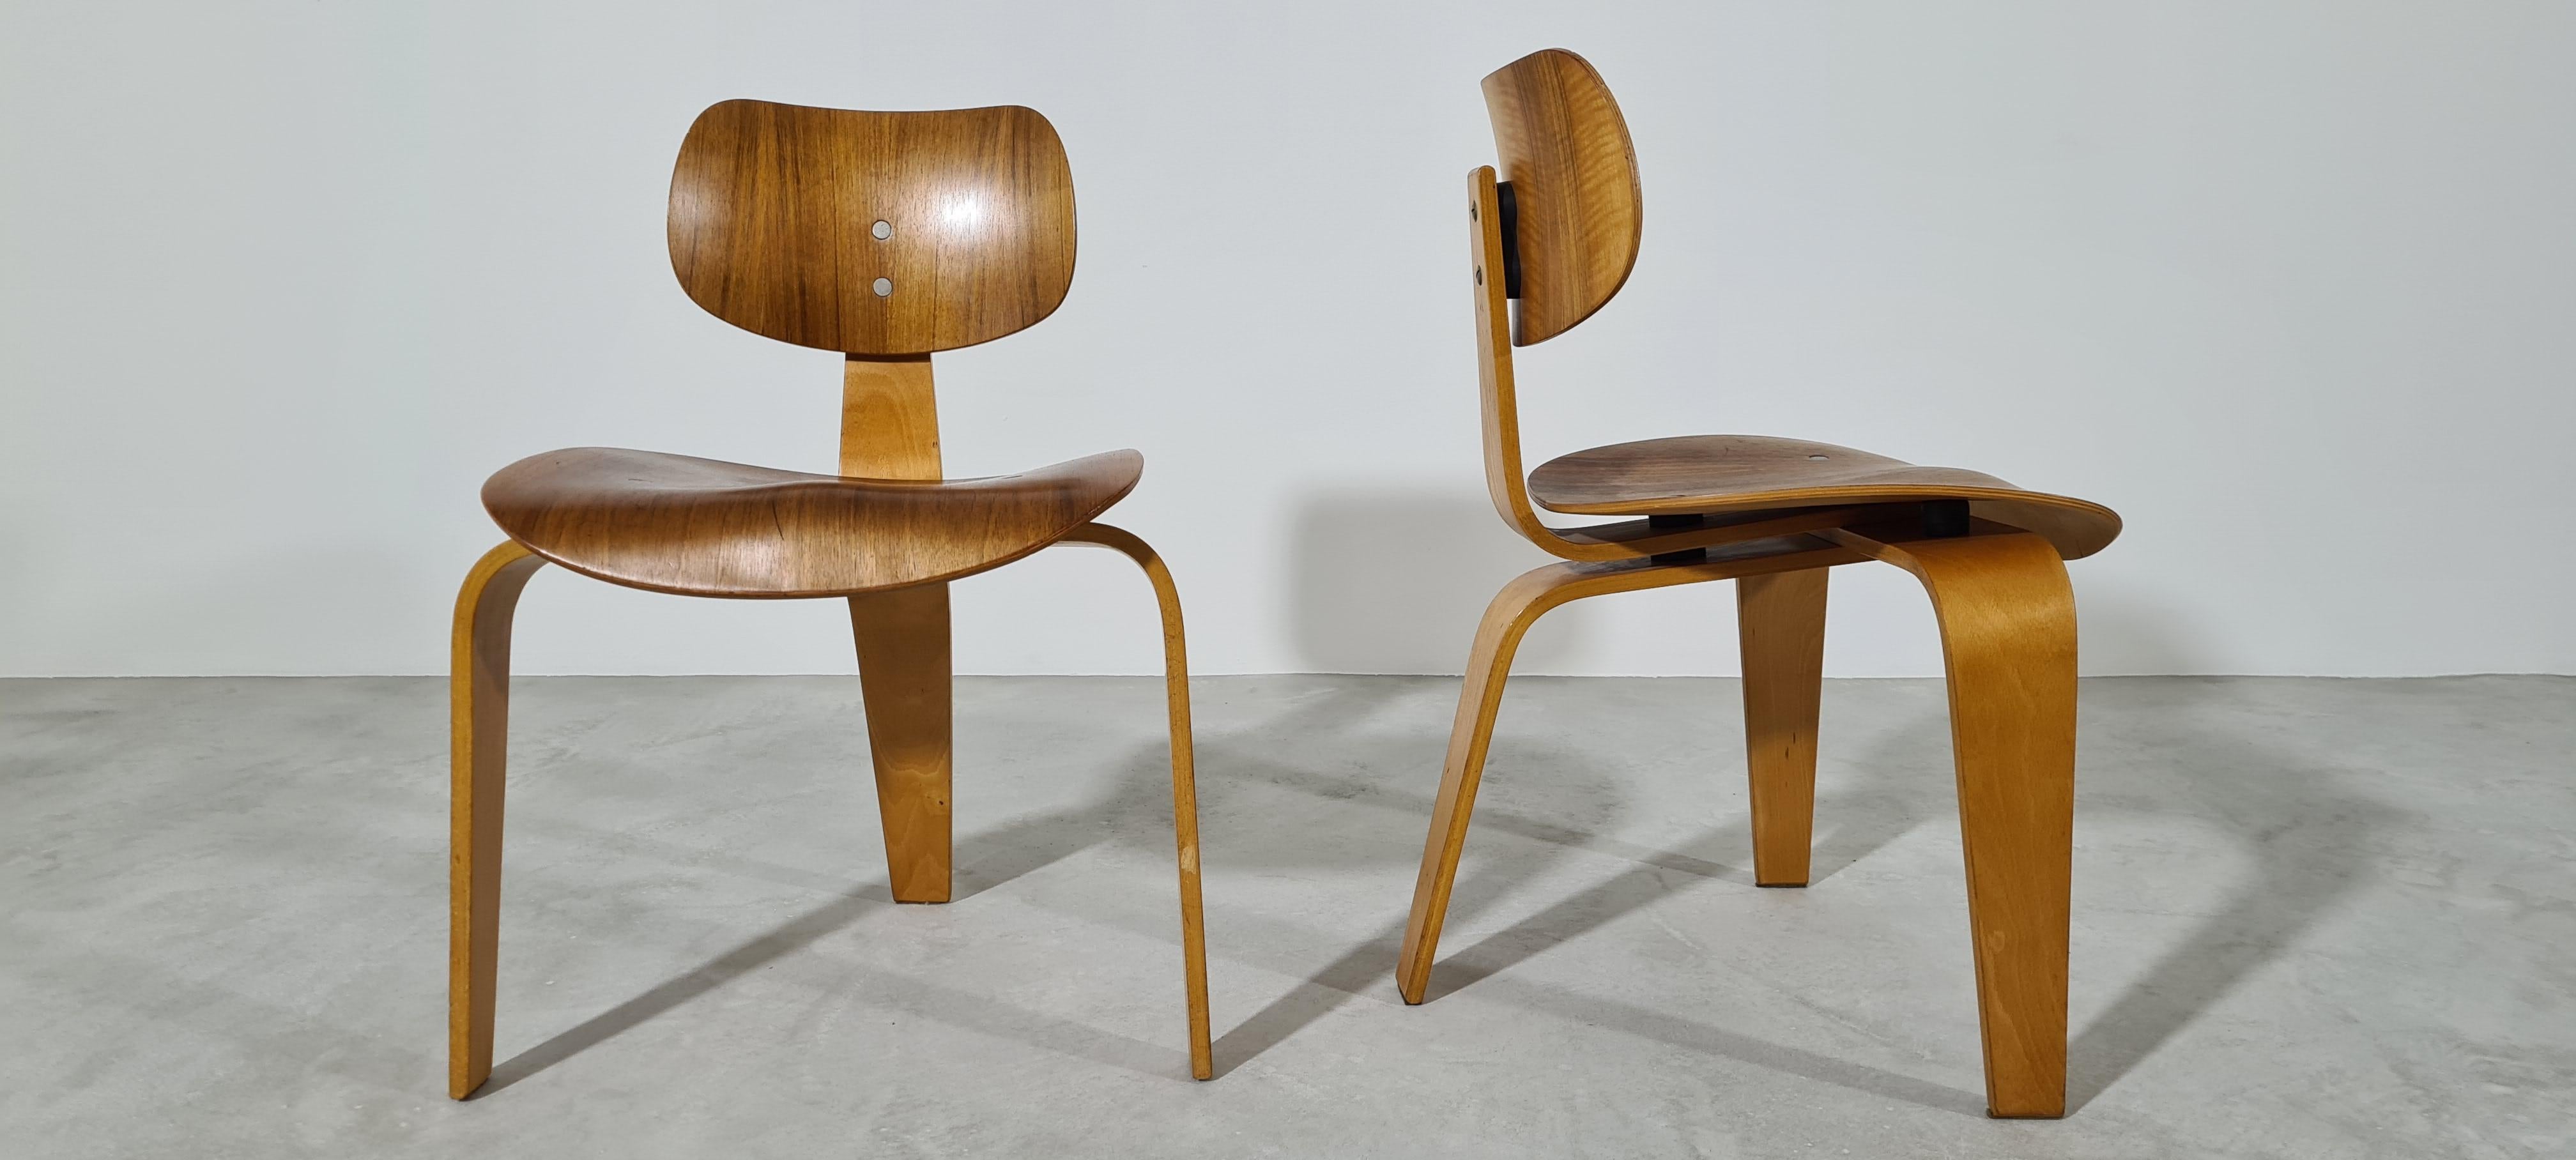 A beautiful set of two SE 42 chairs designed in 1942 by Egon Eiermann for Wilde & Spieth, Germany.
The plywood chairs are in unaltered original condition from 1950 in the rare walnut finish - see also the original label with the distinctive oak